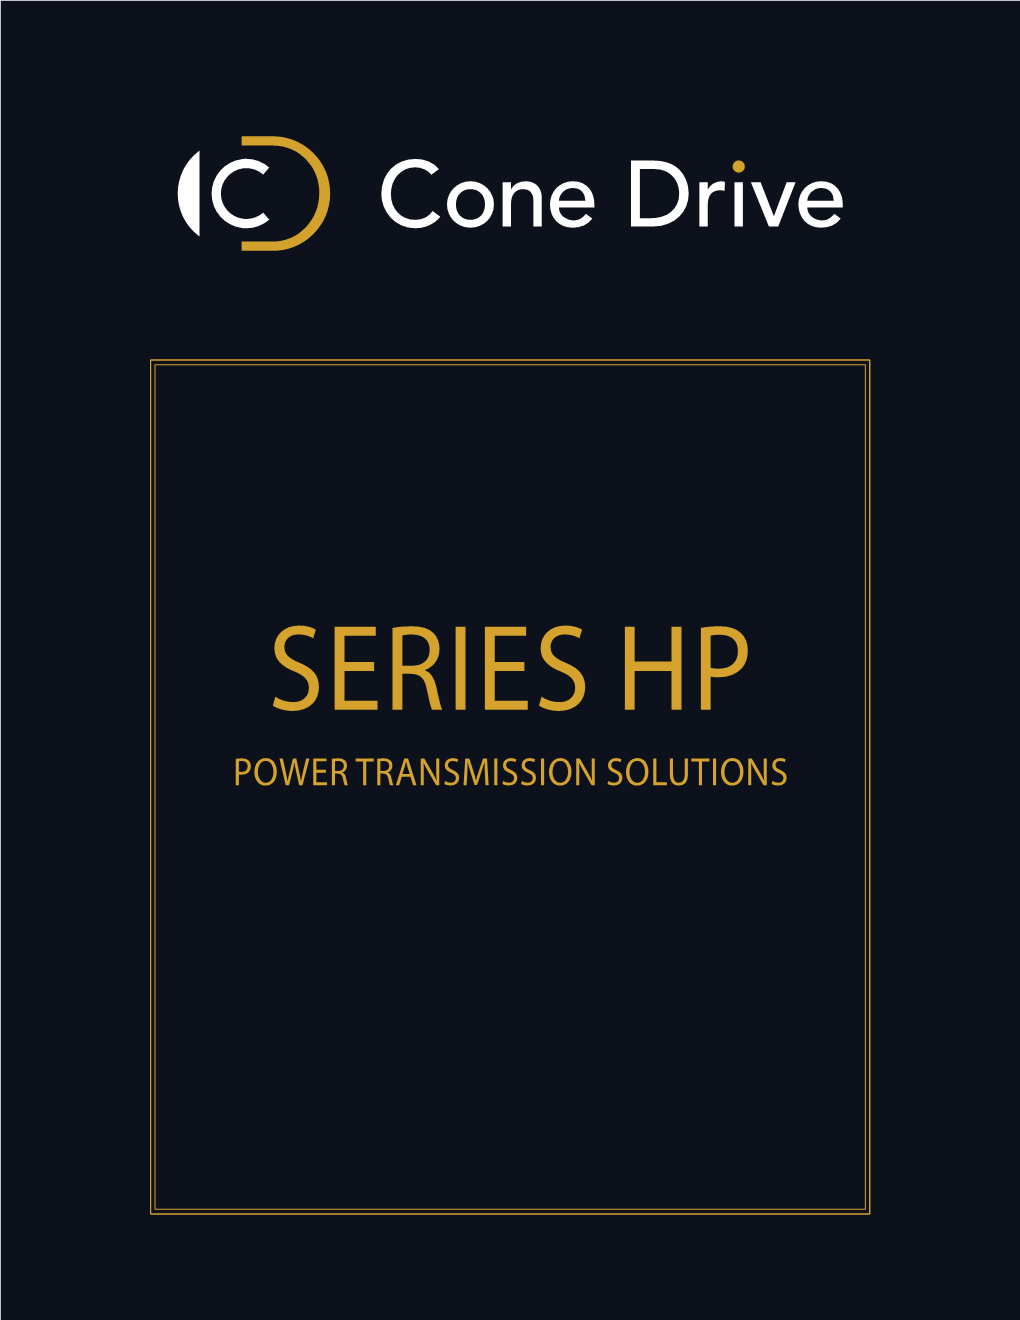 Power Transmission Solutions